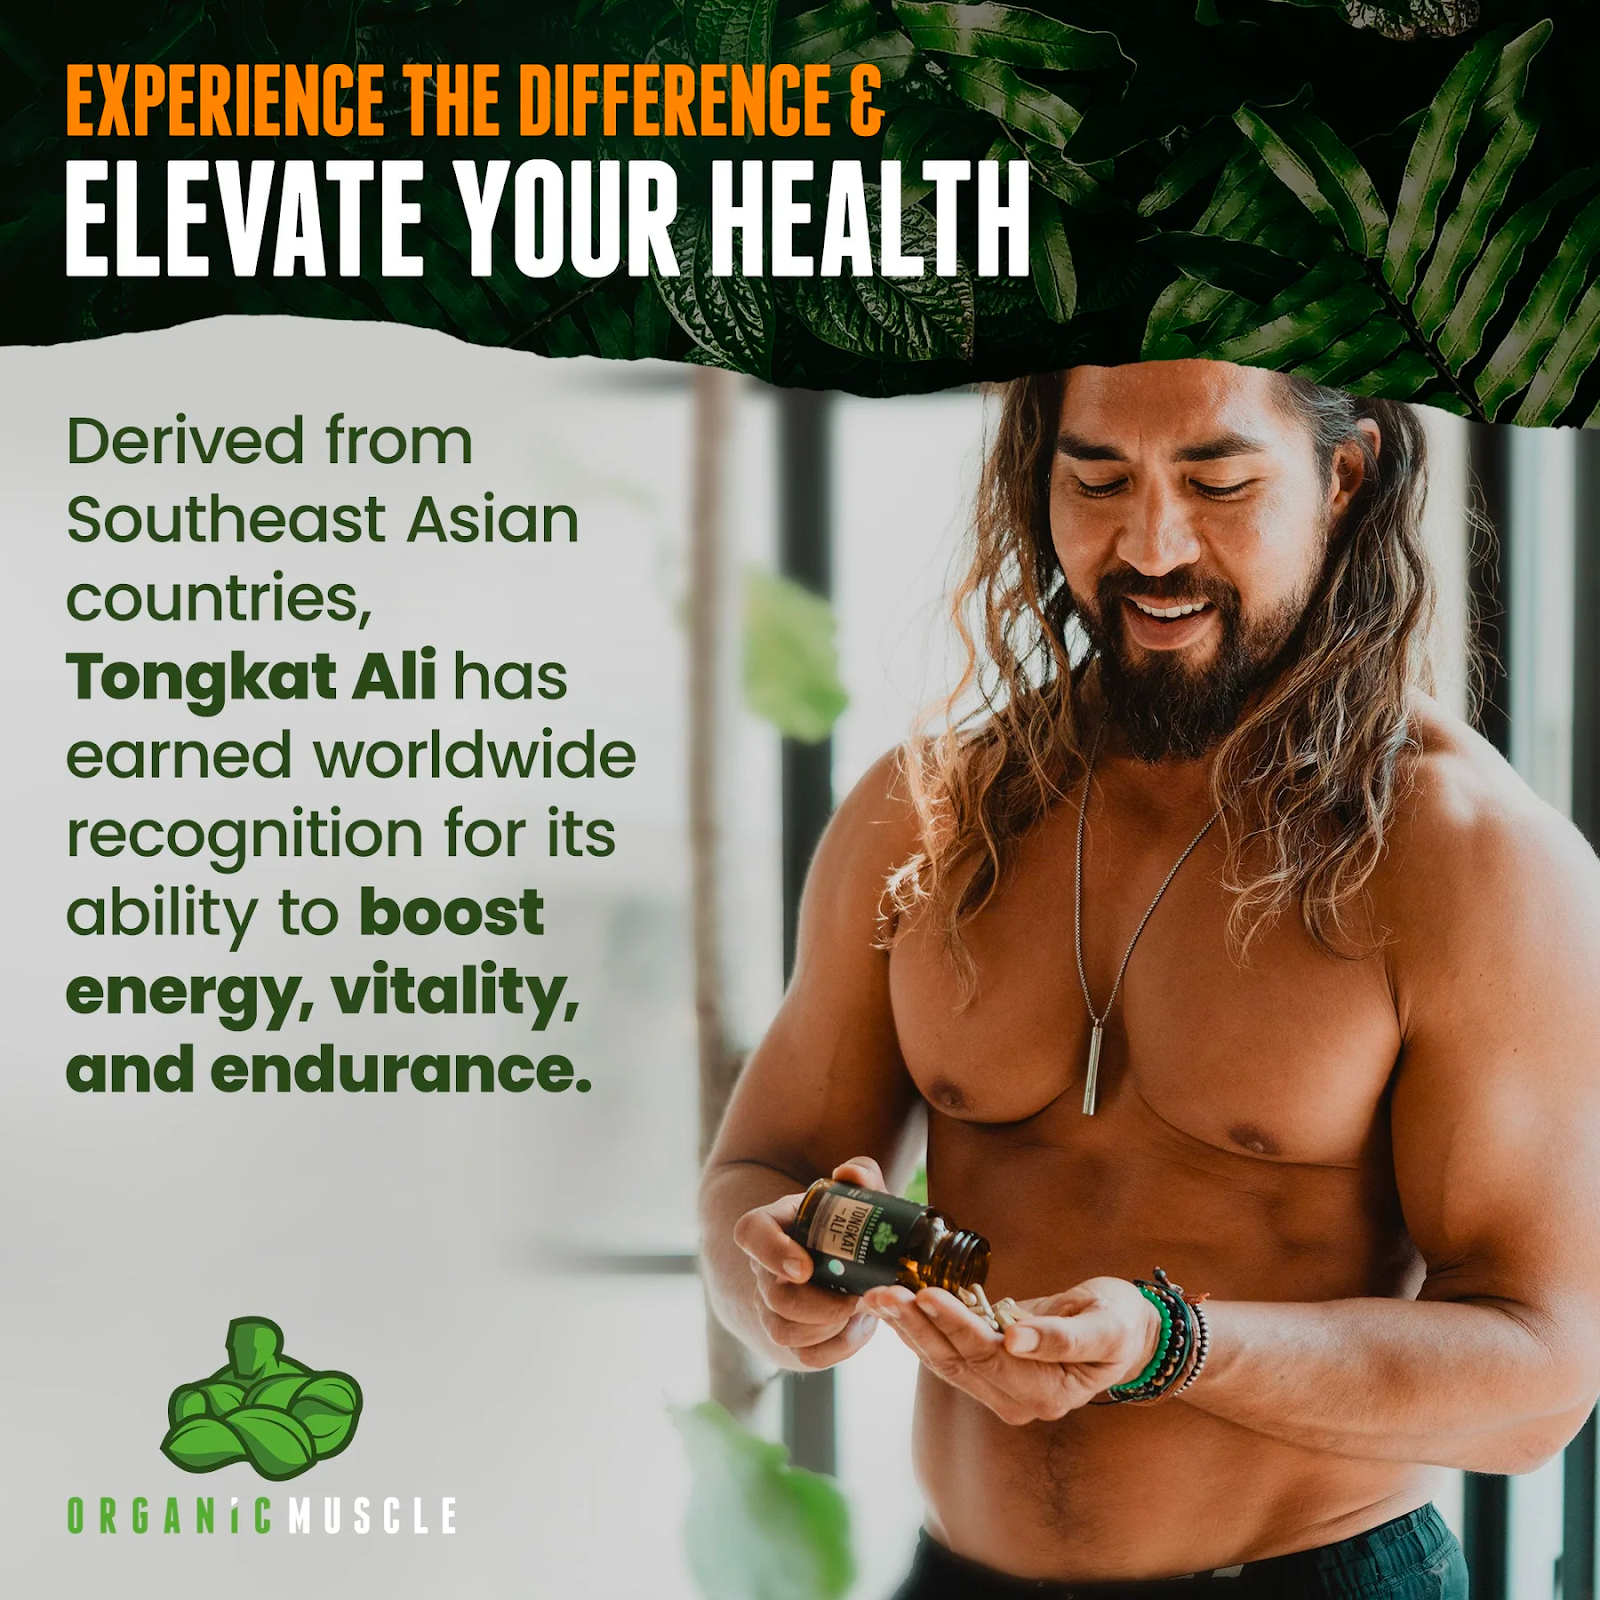 Elevate your health